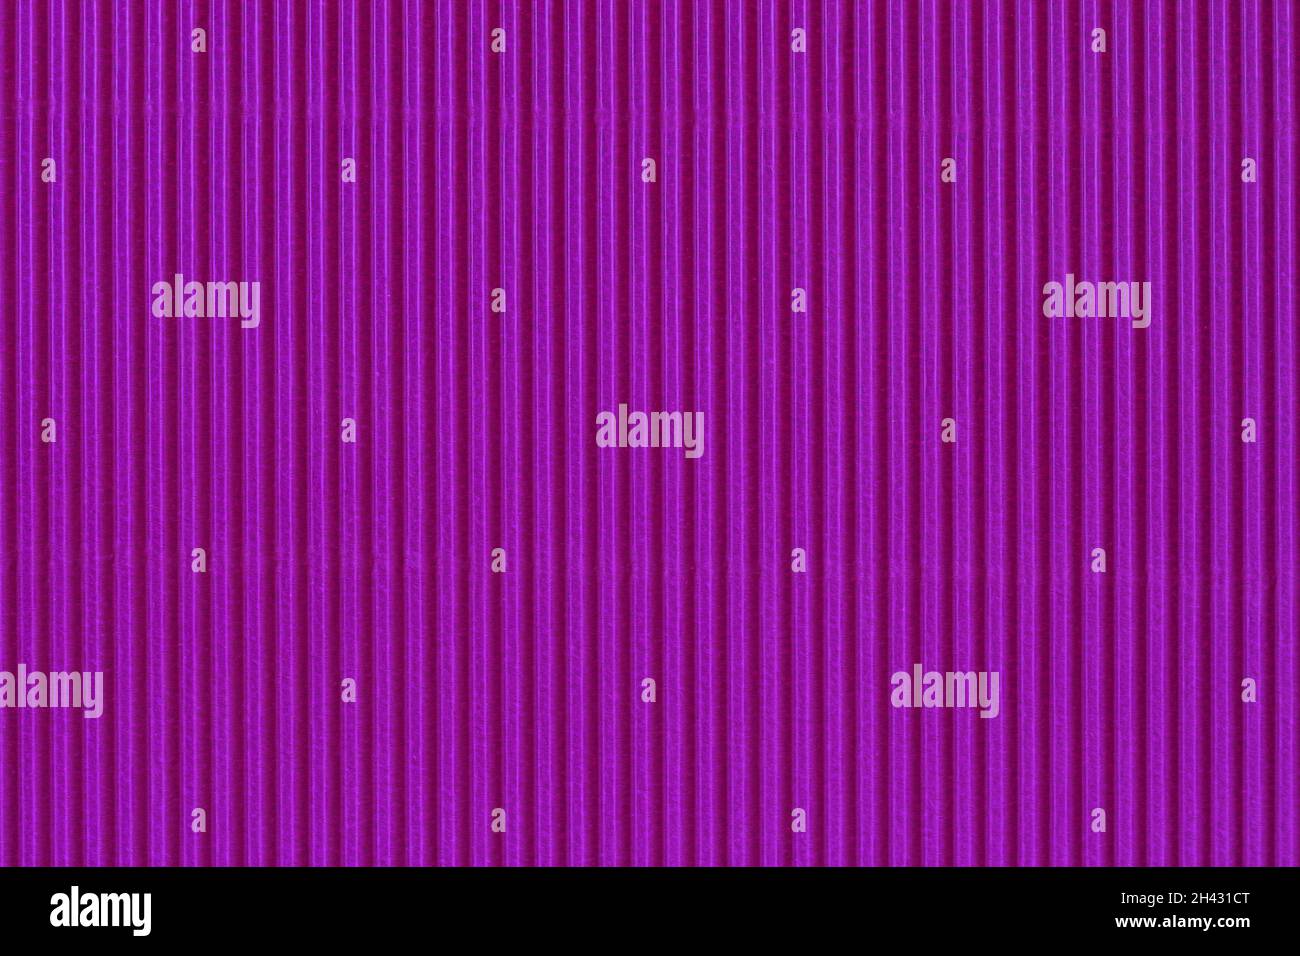 Abstract corrugated texture of vibrant bright purple color. Striped pattern closeup Stock Photo